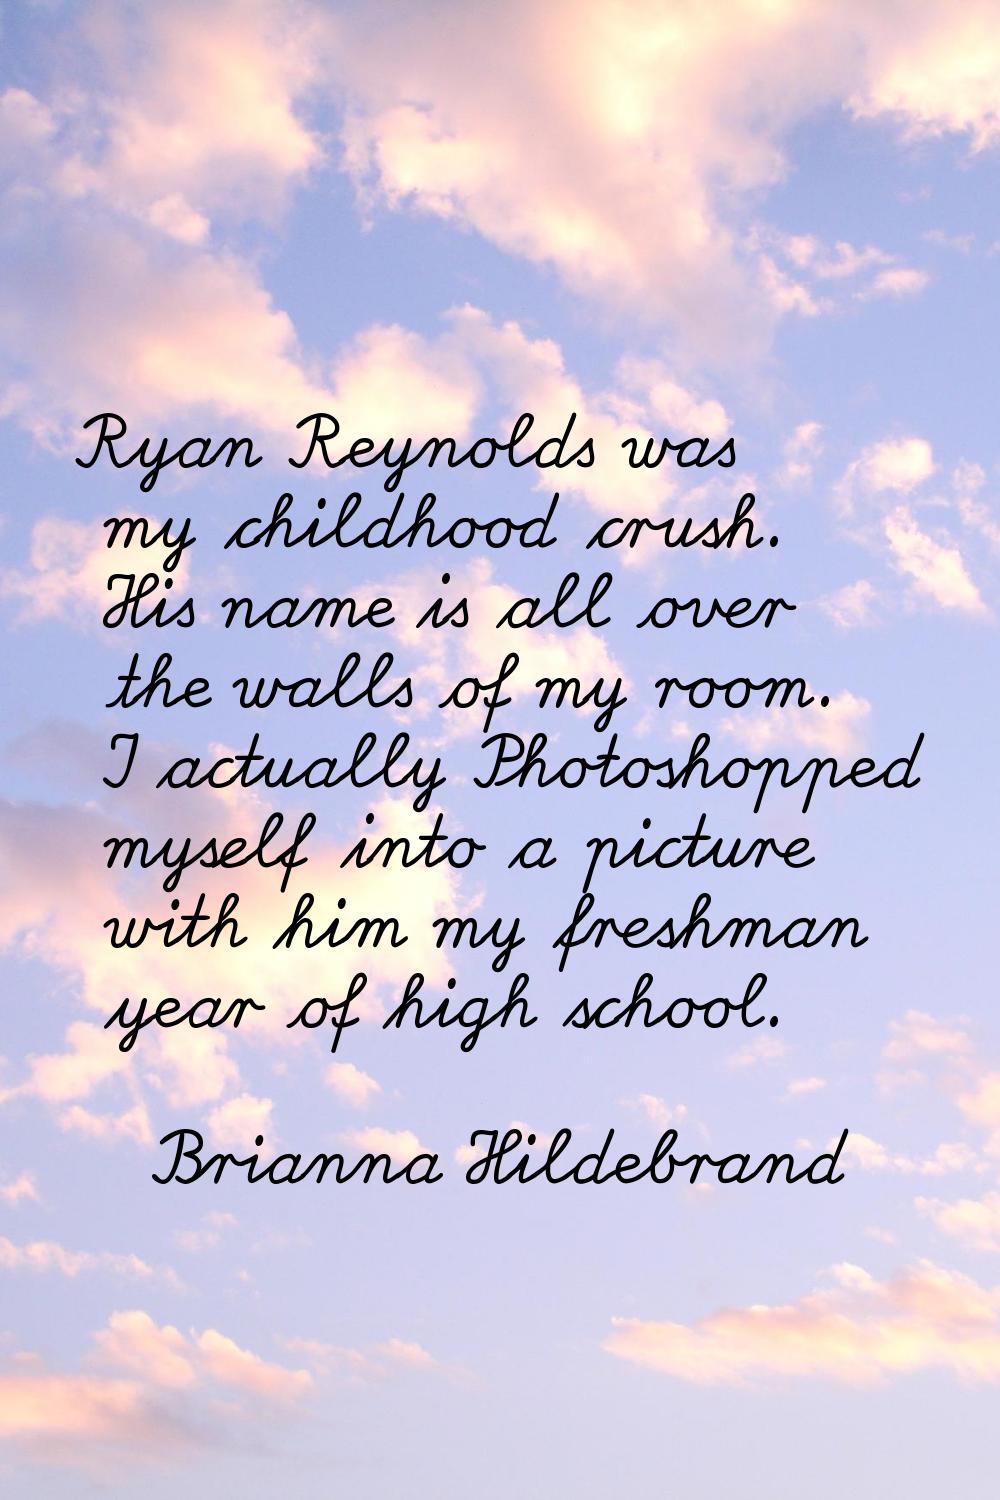 Ryan Reynolds was my childhood crush. His name is all over the walls of my room. I actually Photosh